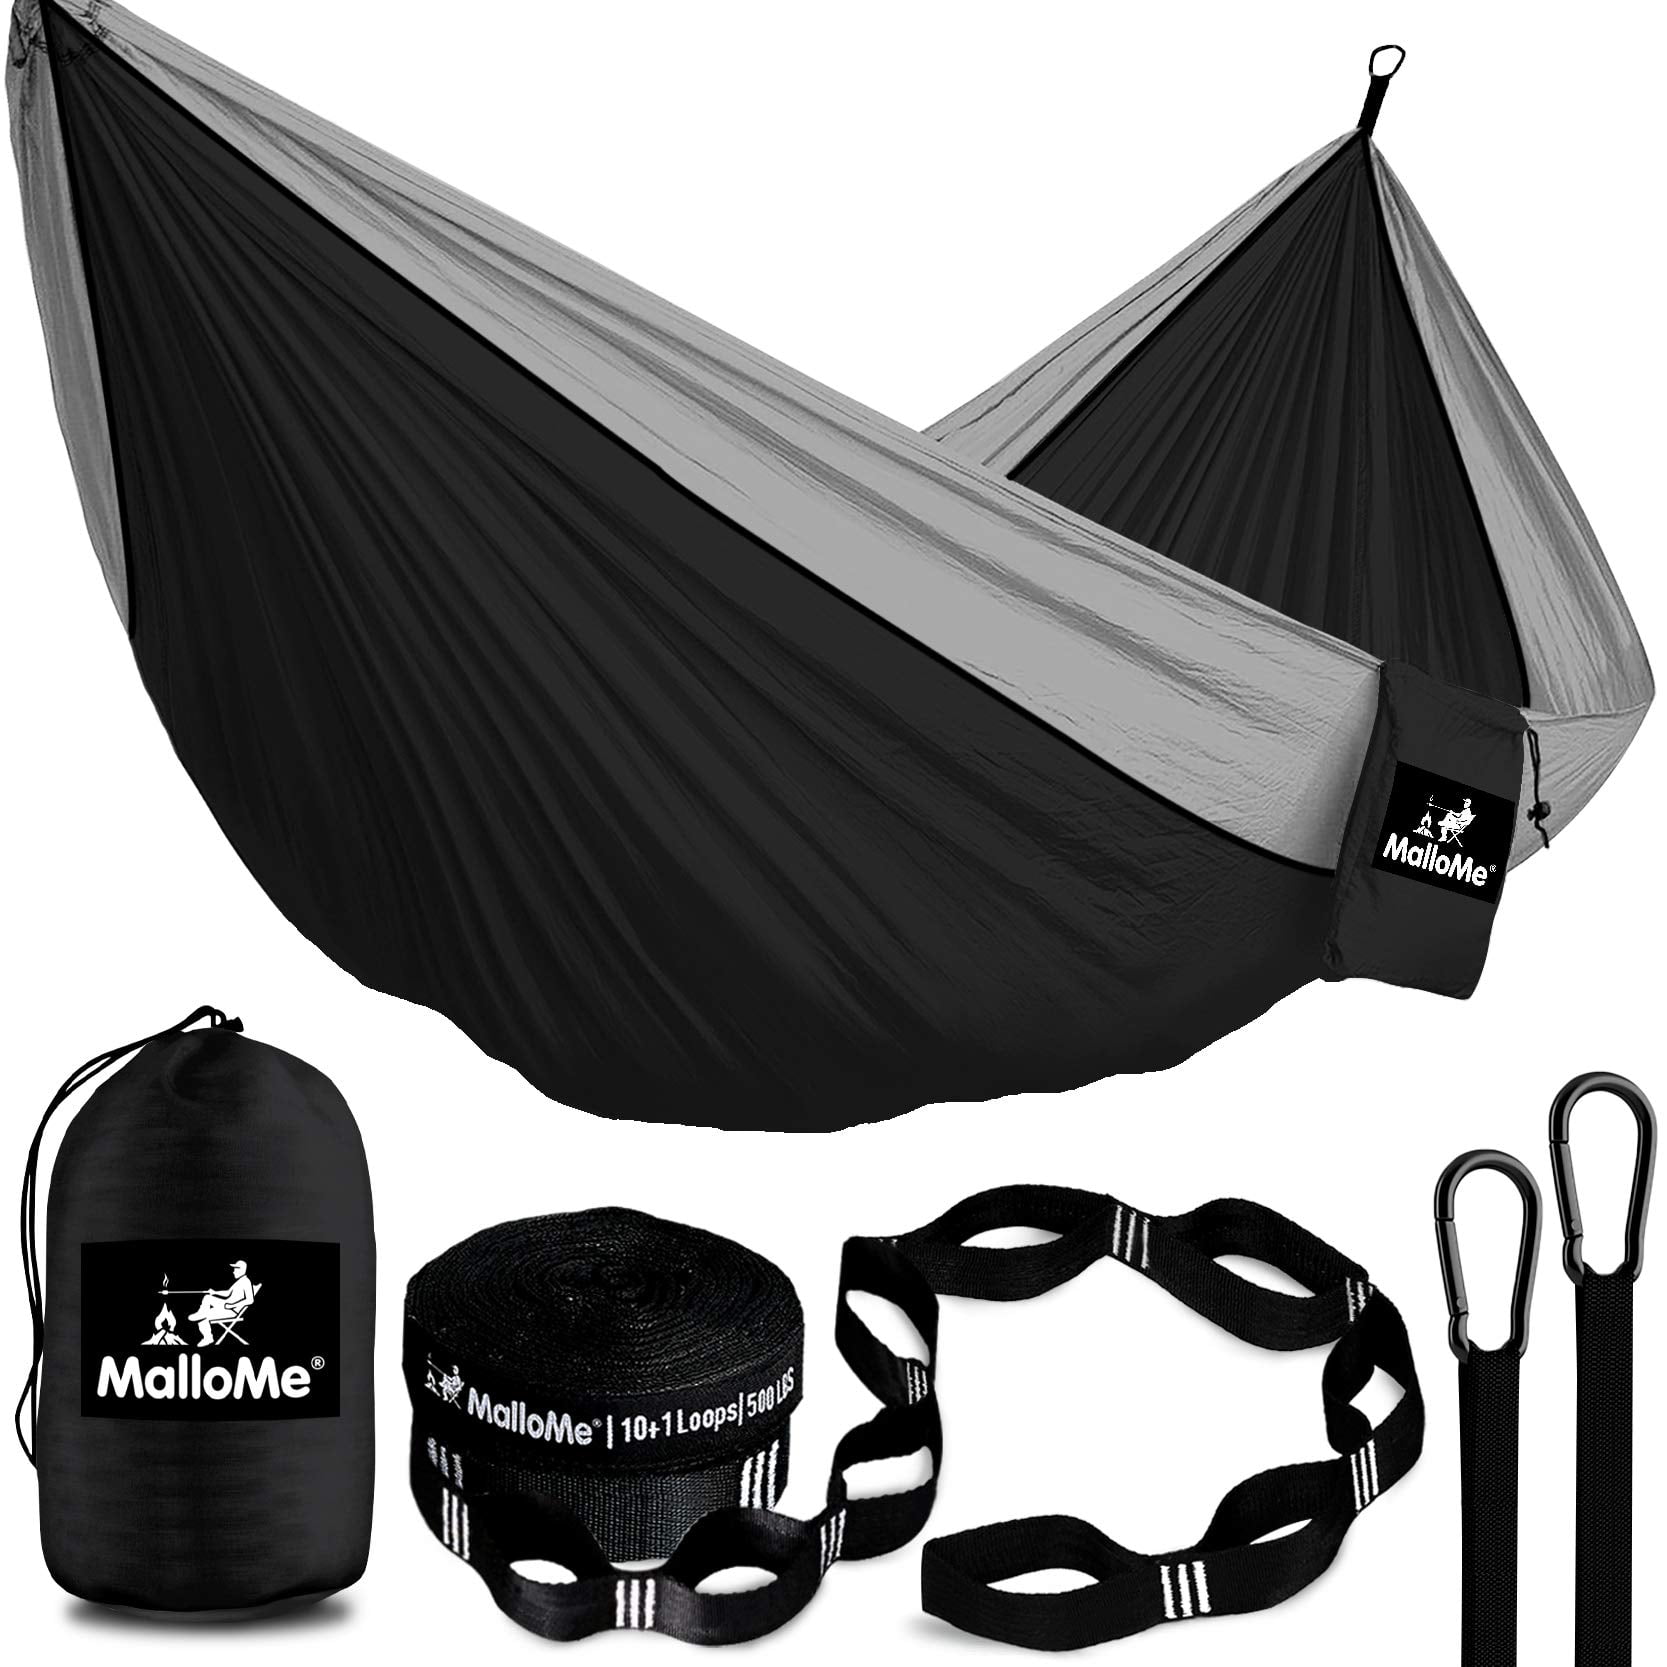 Parachute Lightweight Nylon with Hammok Tree Straps Set MalloMe Double & Single Portable Camping Hammock 2 Person Equipment Kids Accessories Max 1000 lbs Breaking Capacity Free 2 Carabiners 